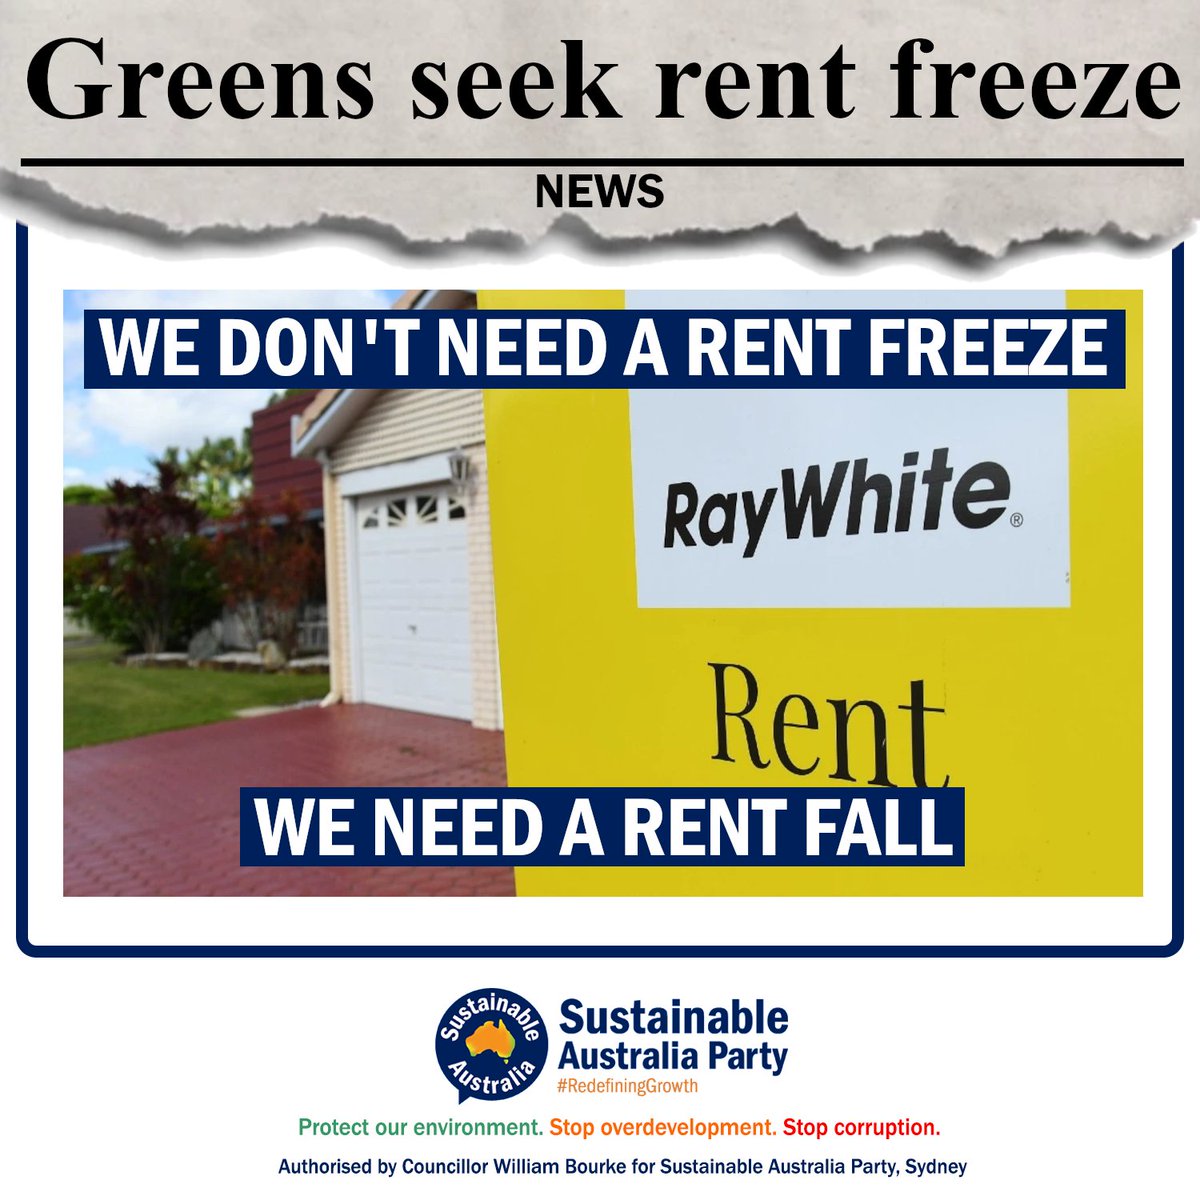 We don't need a #rentfreeze, we need a rent fall.
It's time to put our #EnvironmentFirst AND sustainably solve the housing crisis by address the root cause - ALL aspects of government engineered hyper-demand:
facebook.com/VoteSustainabl…